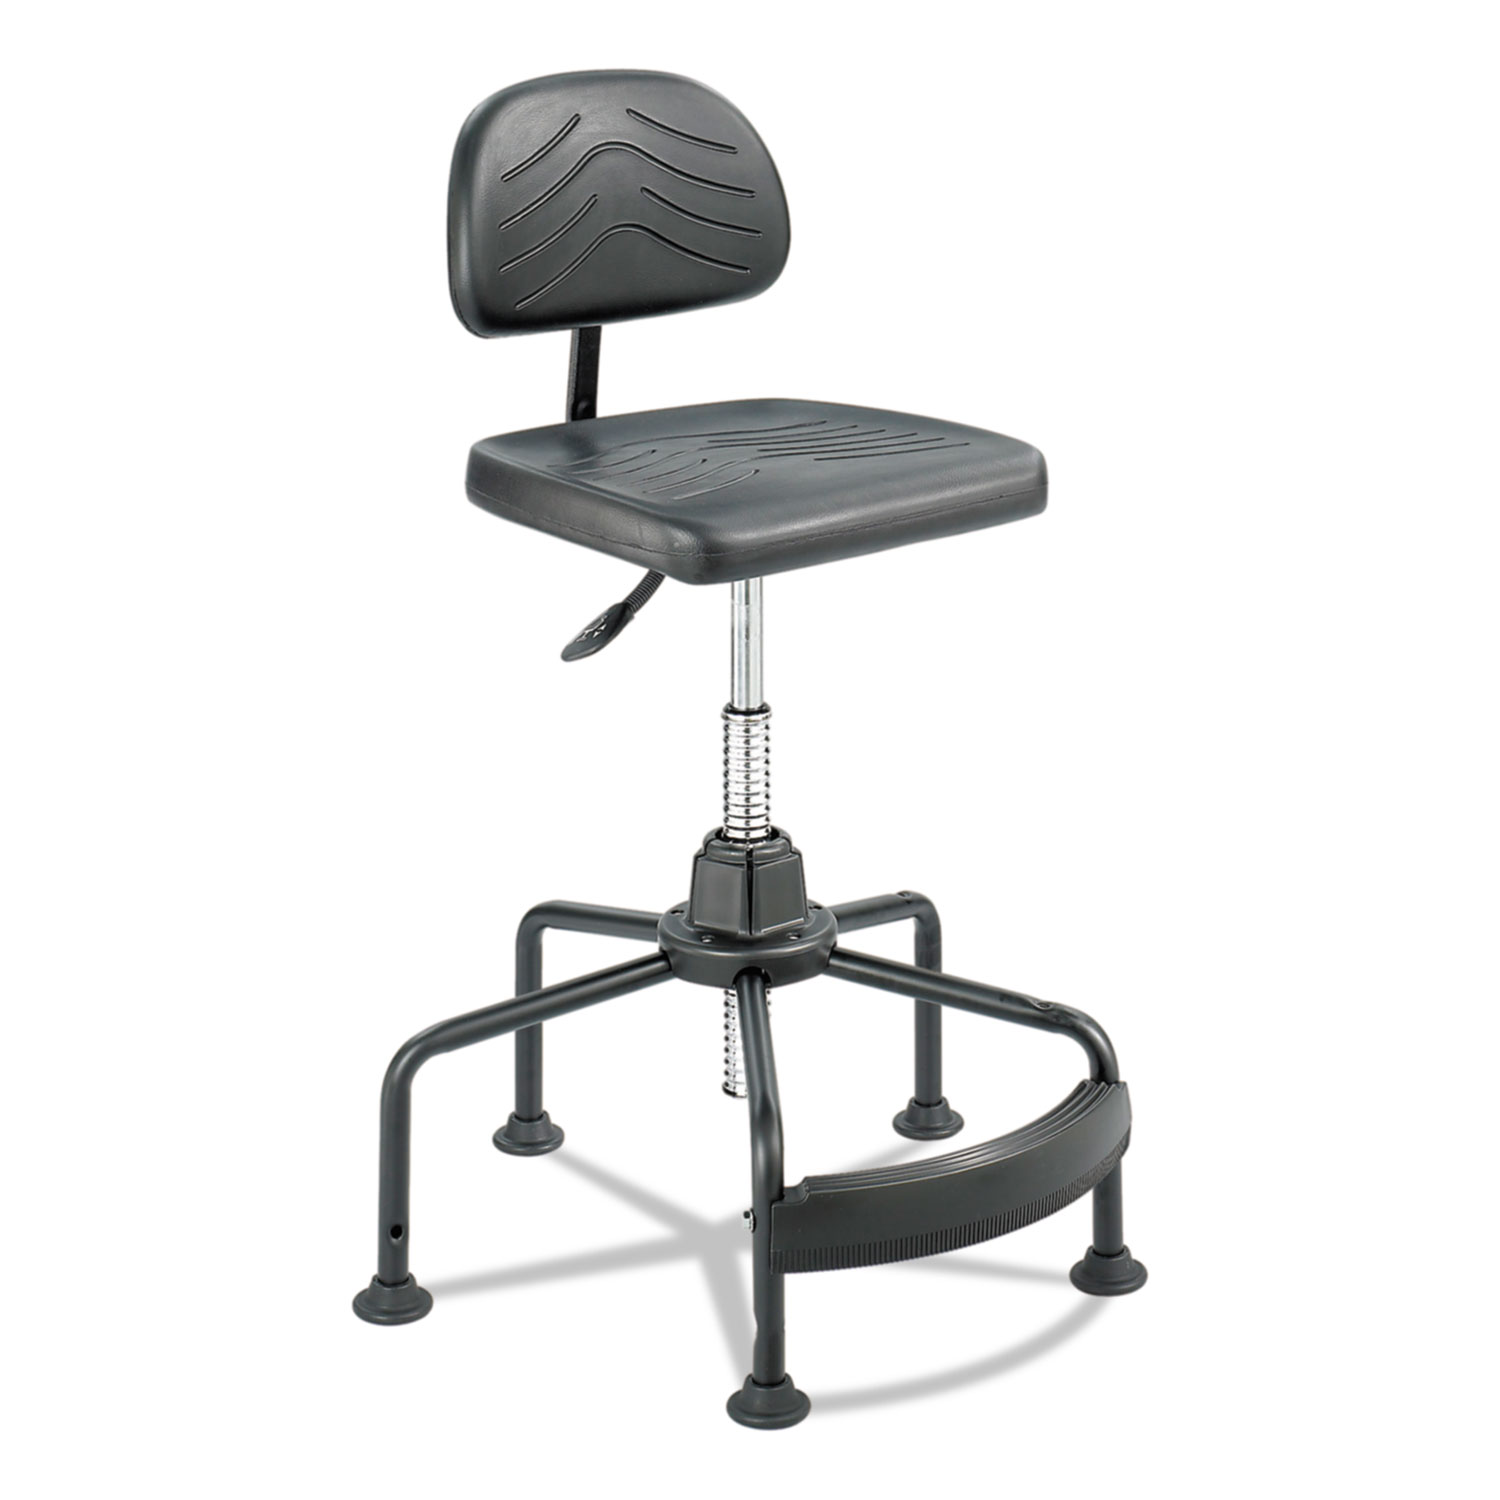  Safco 5117 Task Master Economy Industrial Chair, 35 Seat Height, Supports up to 250 lbs., Black Seat/Black Back, Black Base (SAF5117) 